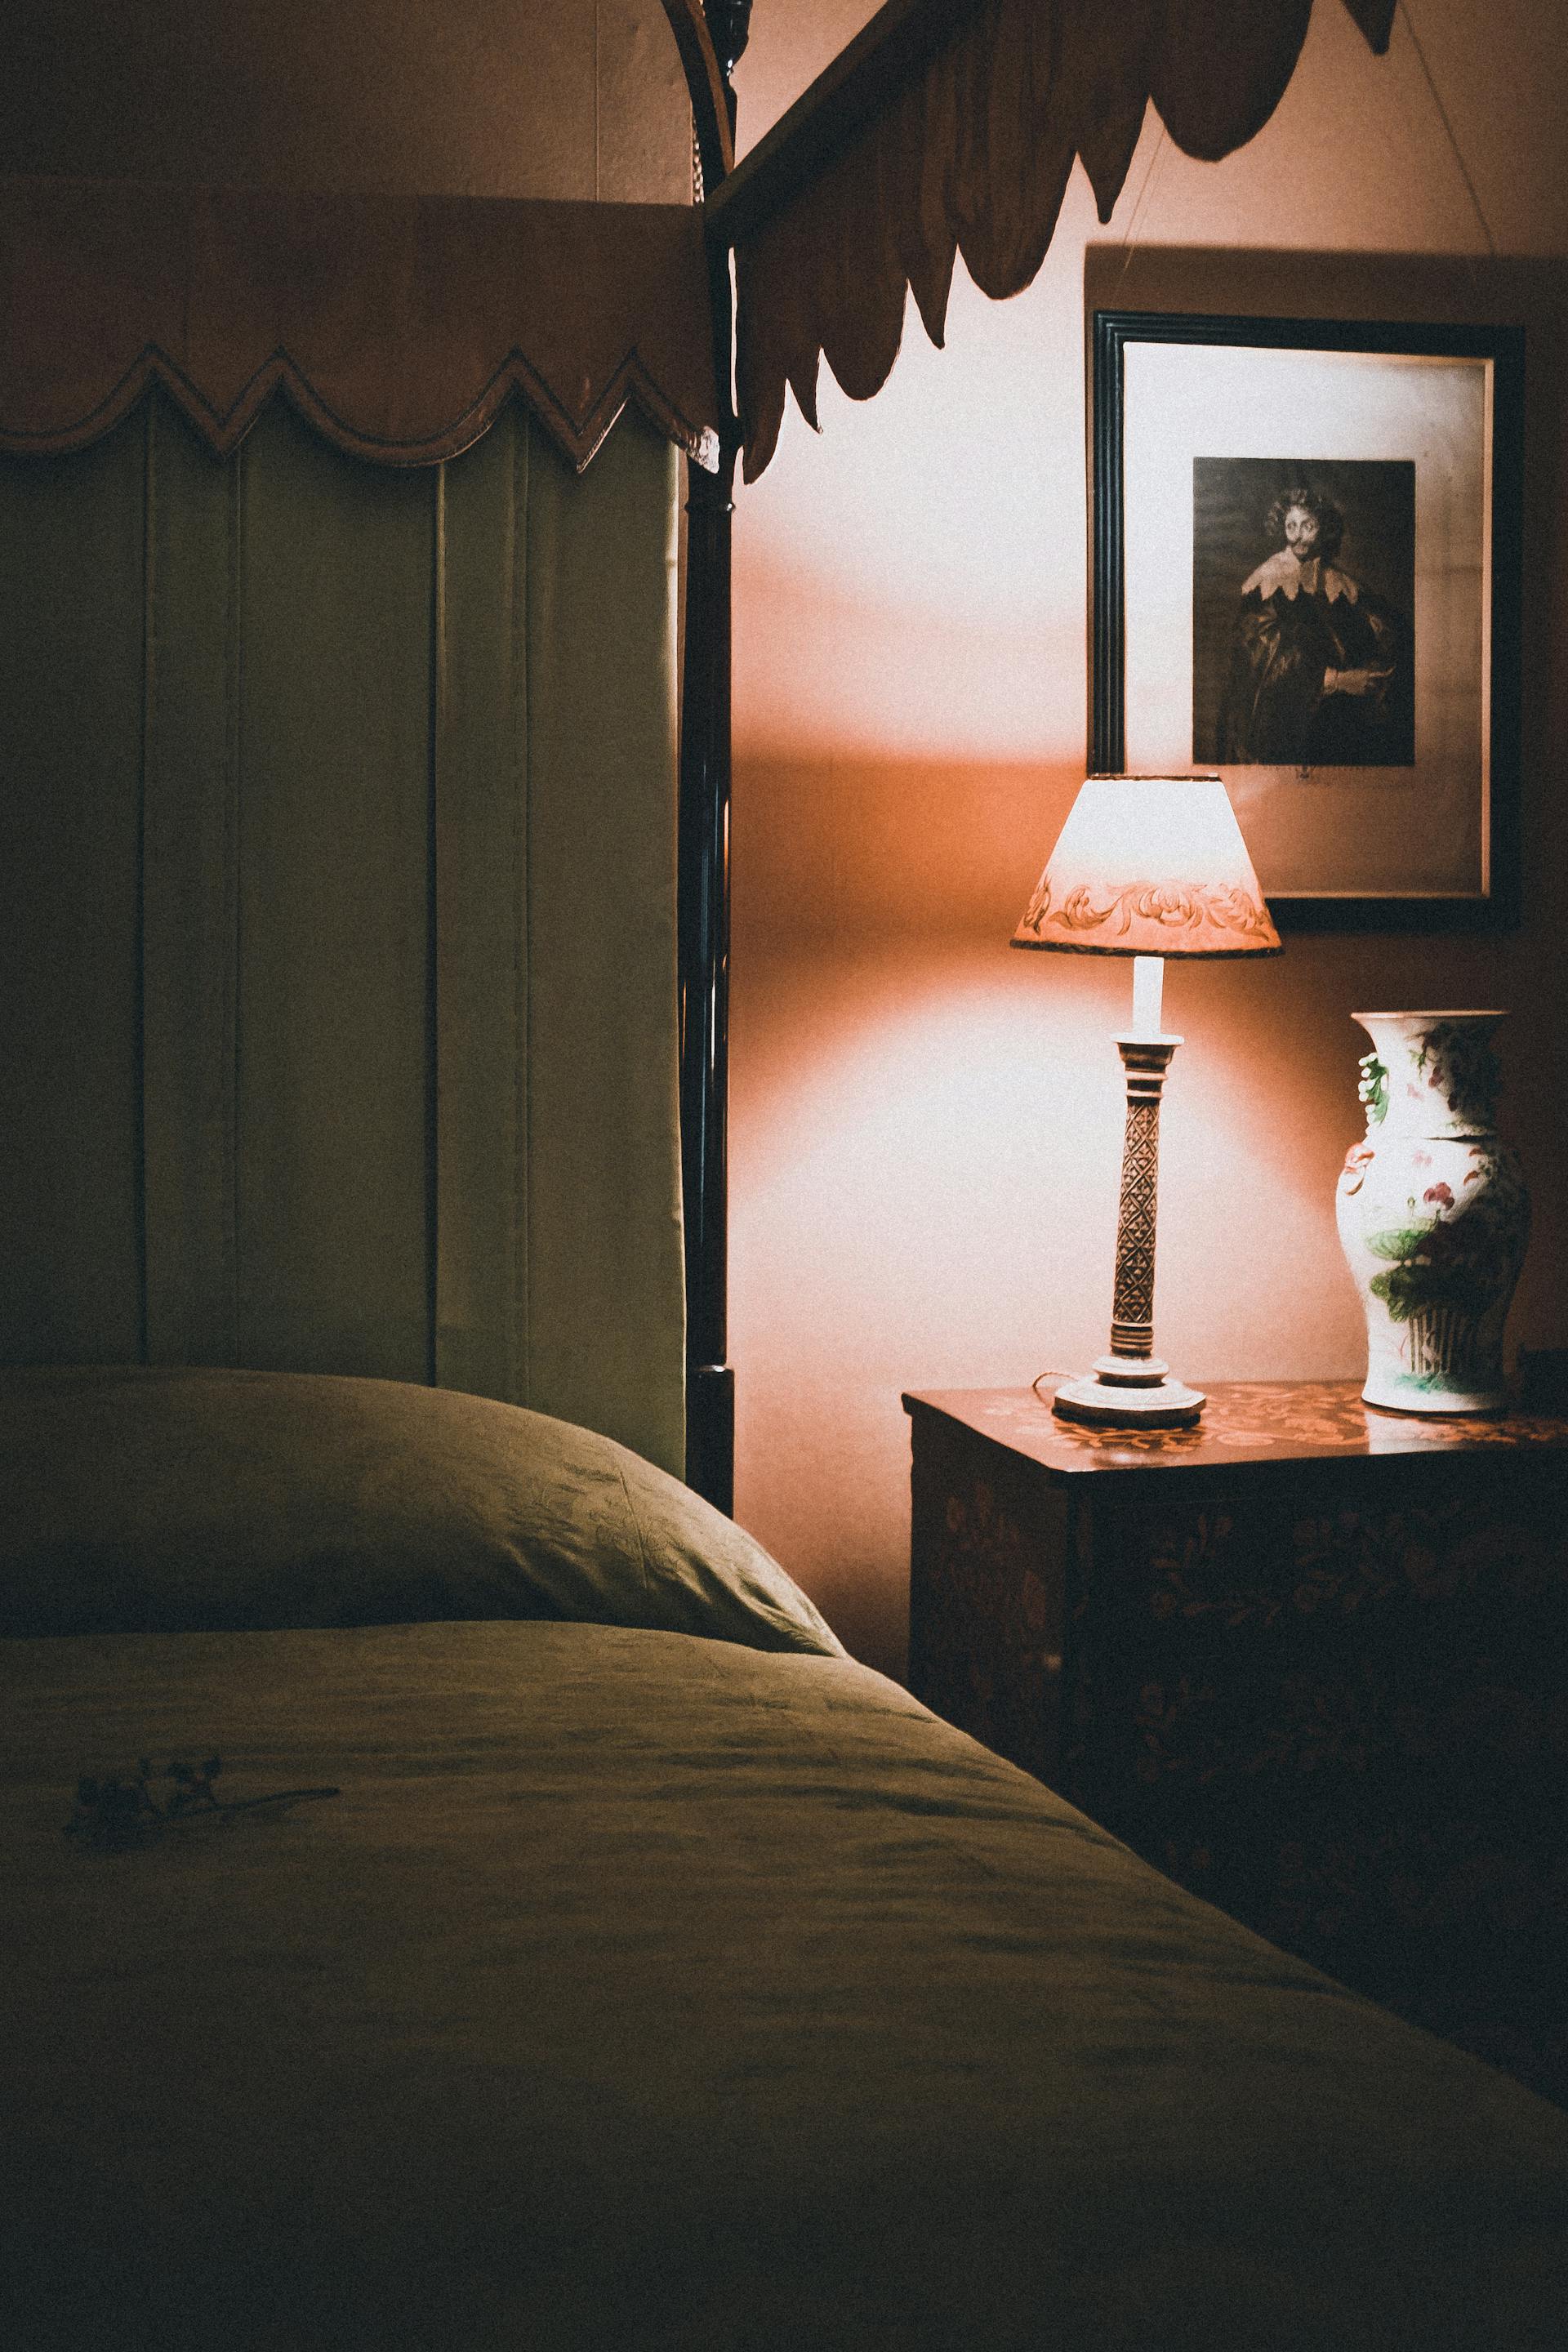 A close-up shot of a bedroom dimly lit with a table lamp | Source: Pexels